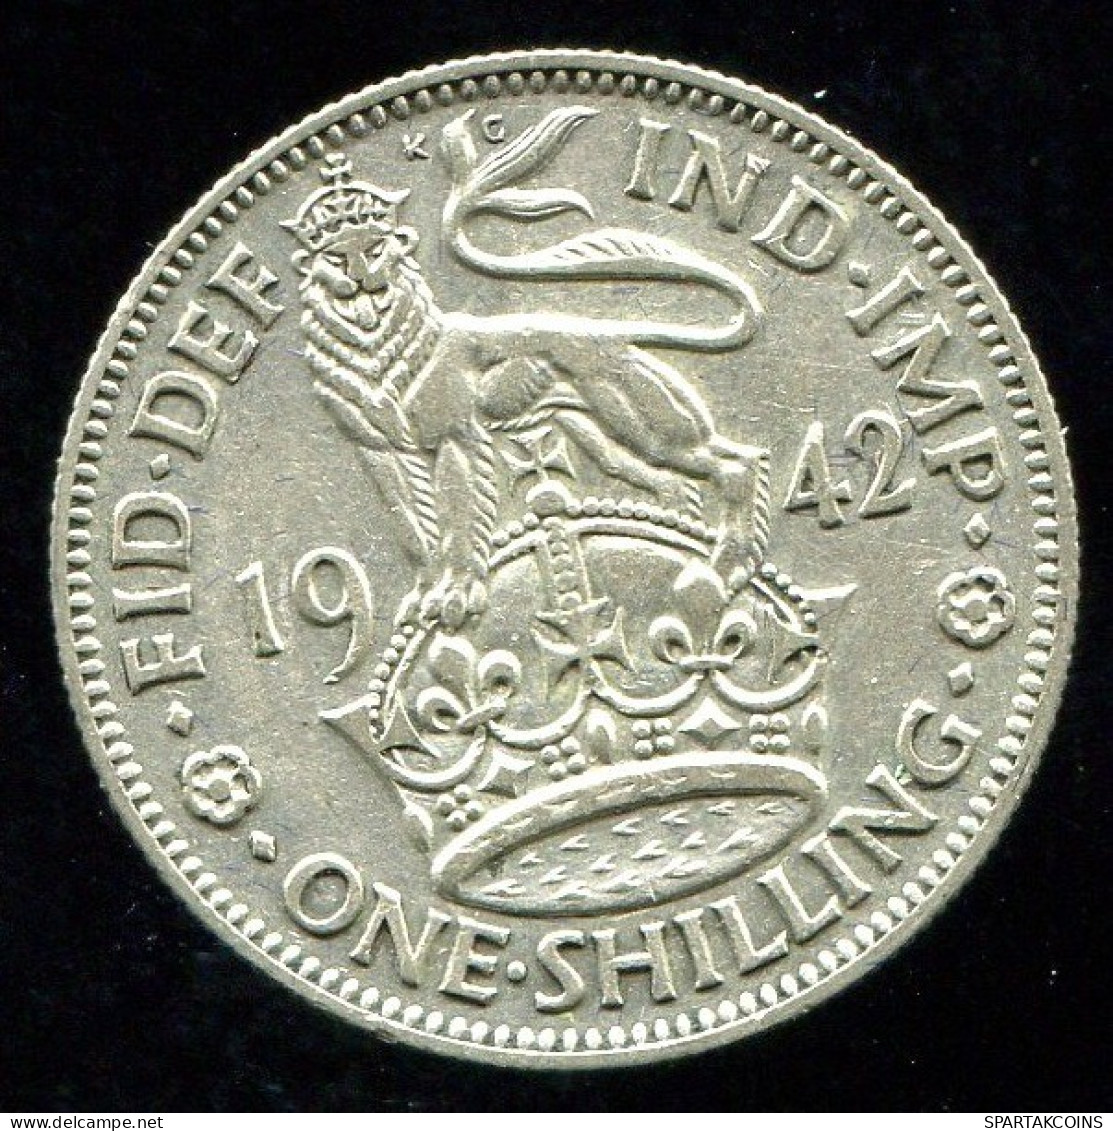 SHILLING 1942 UK GREAT BRITAIN SILVER Coin Coin #W10441.8.U.A - I. 1 Shilling